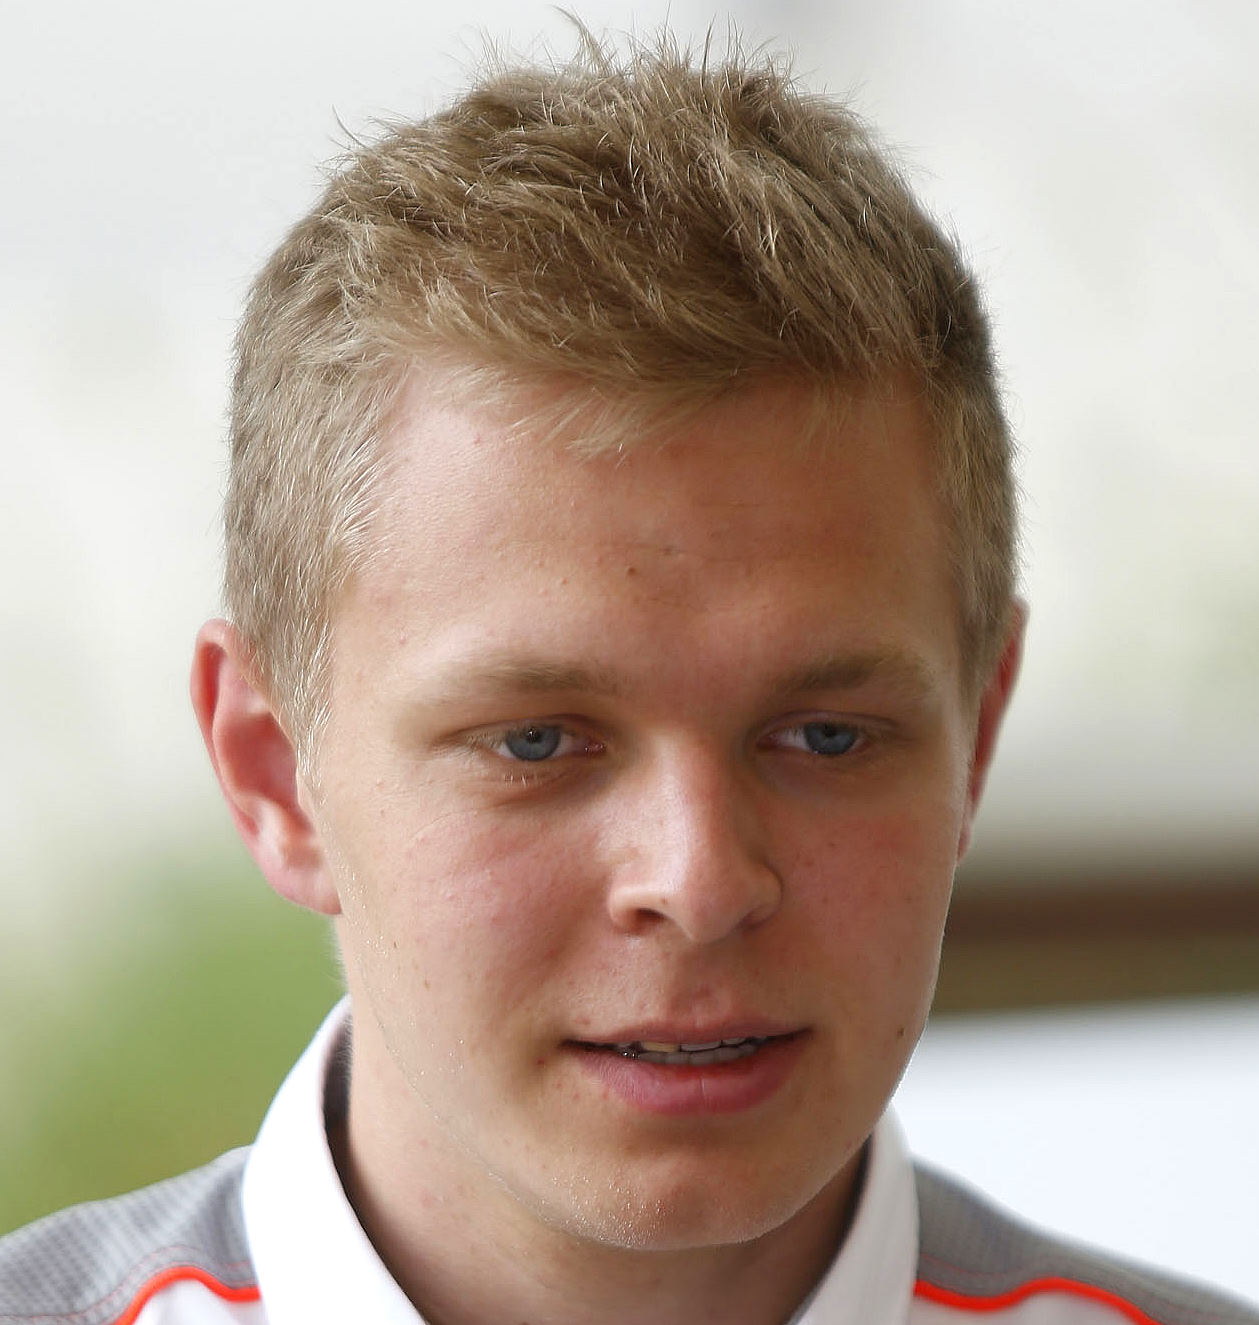 Magnussen's driving career will be wasted waiting for an F1 ride